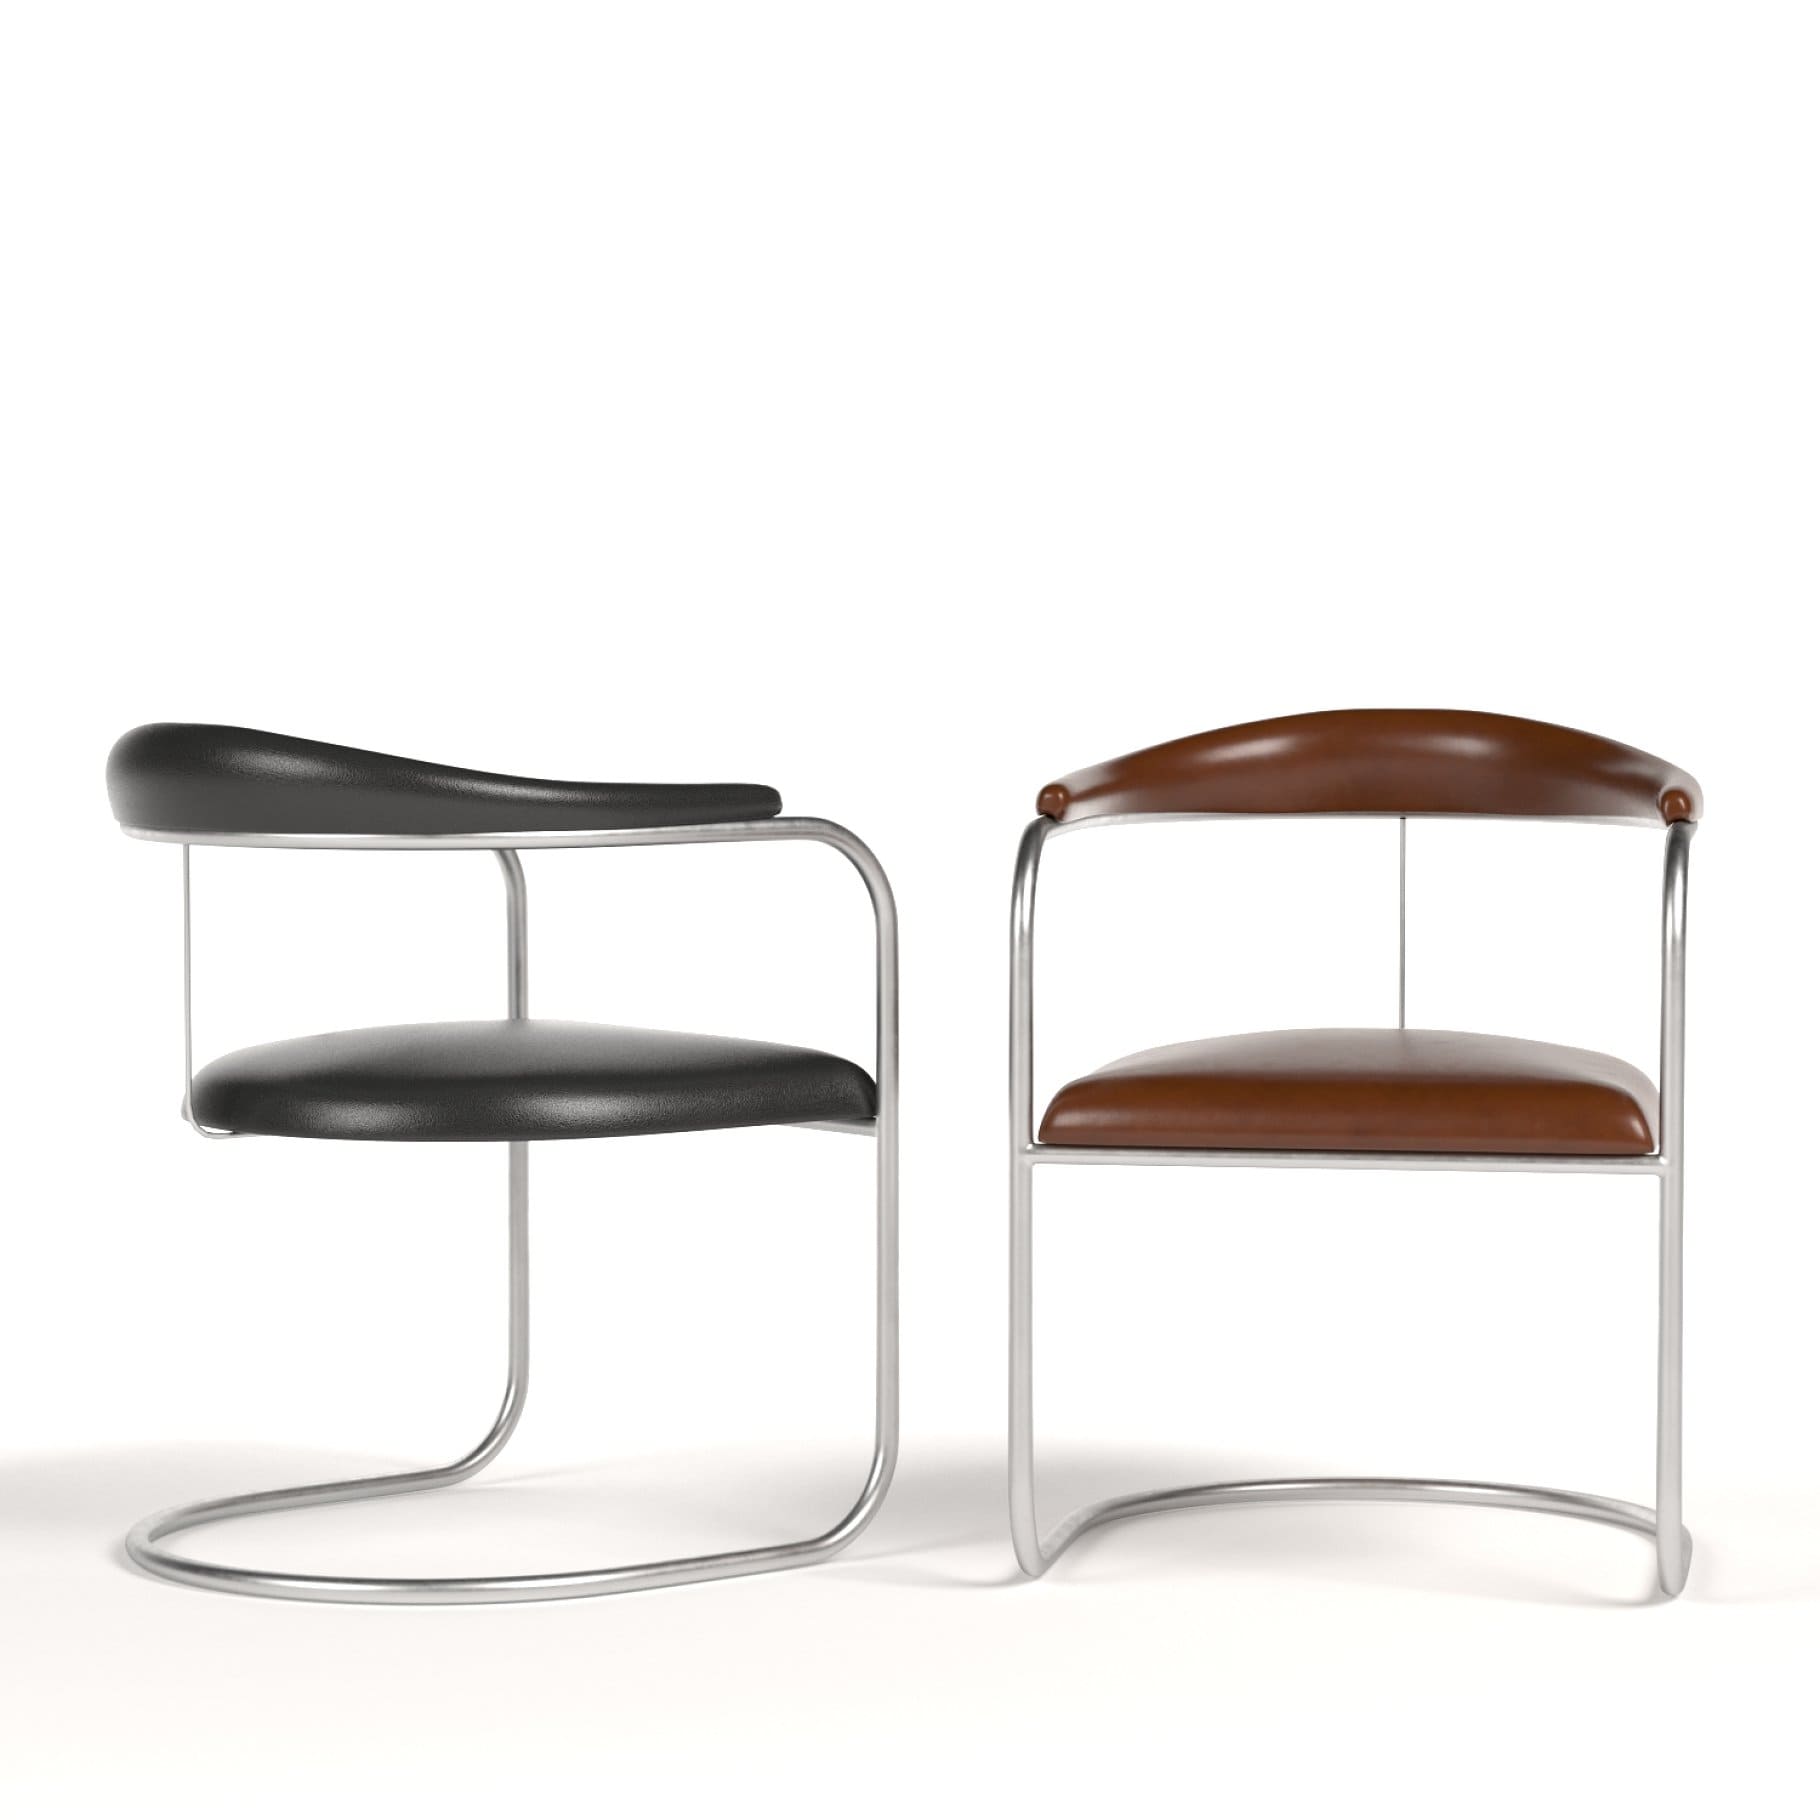 Black and brown SS33 armchair by Anton Lorenz, side view.